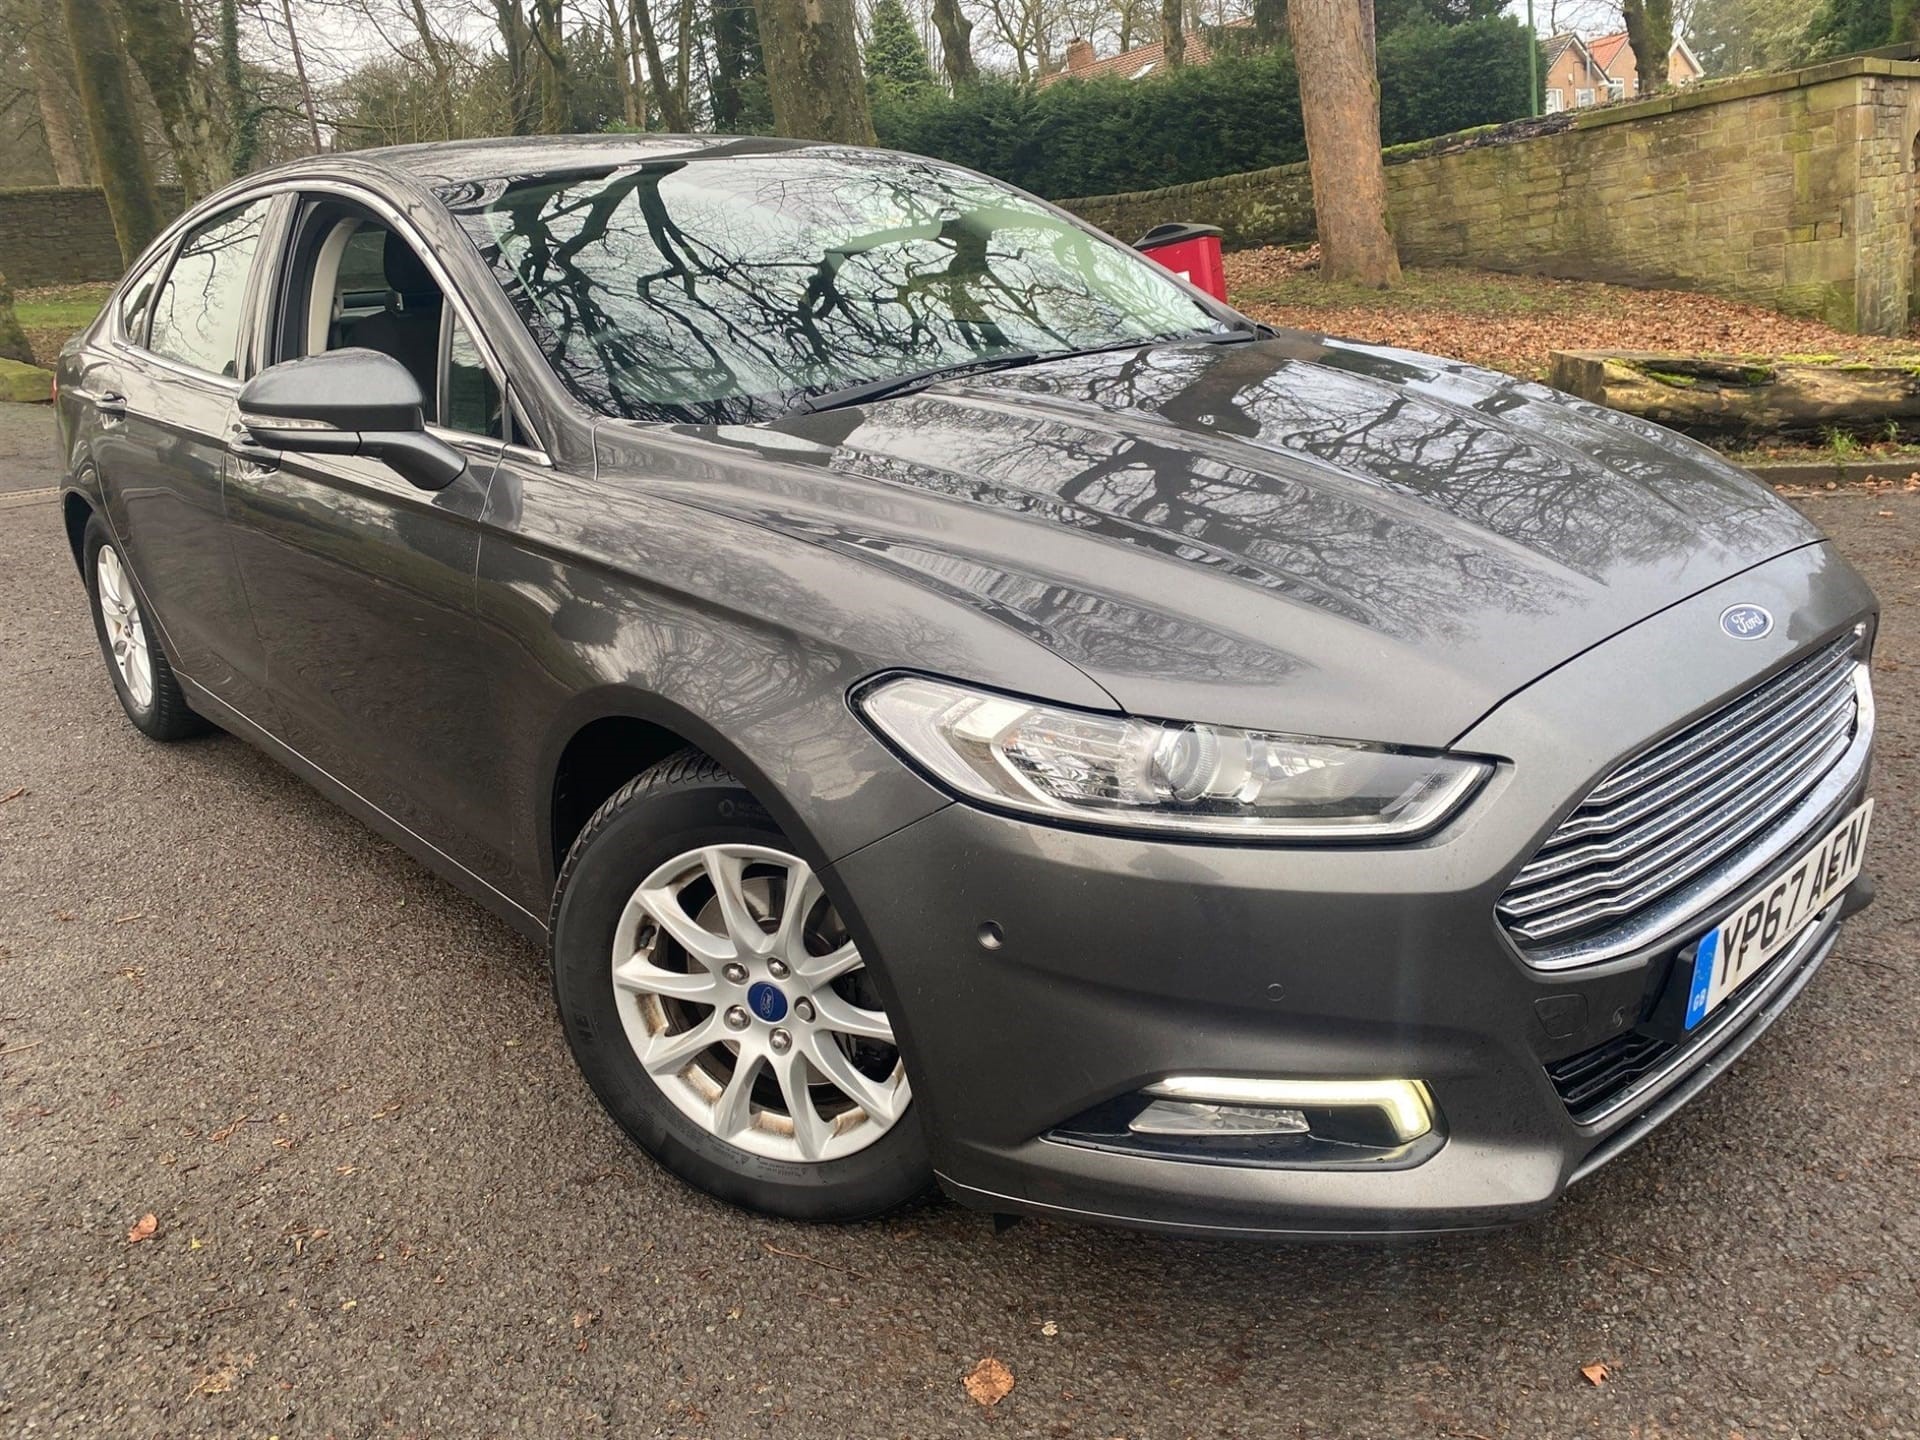 Ford Mondeo for sale in Accrington, Lancashire | Northern Autos Ltd